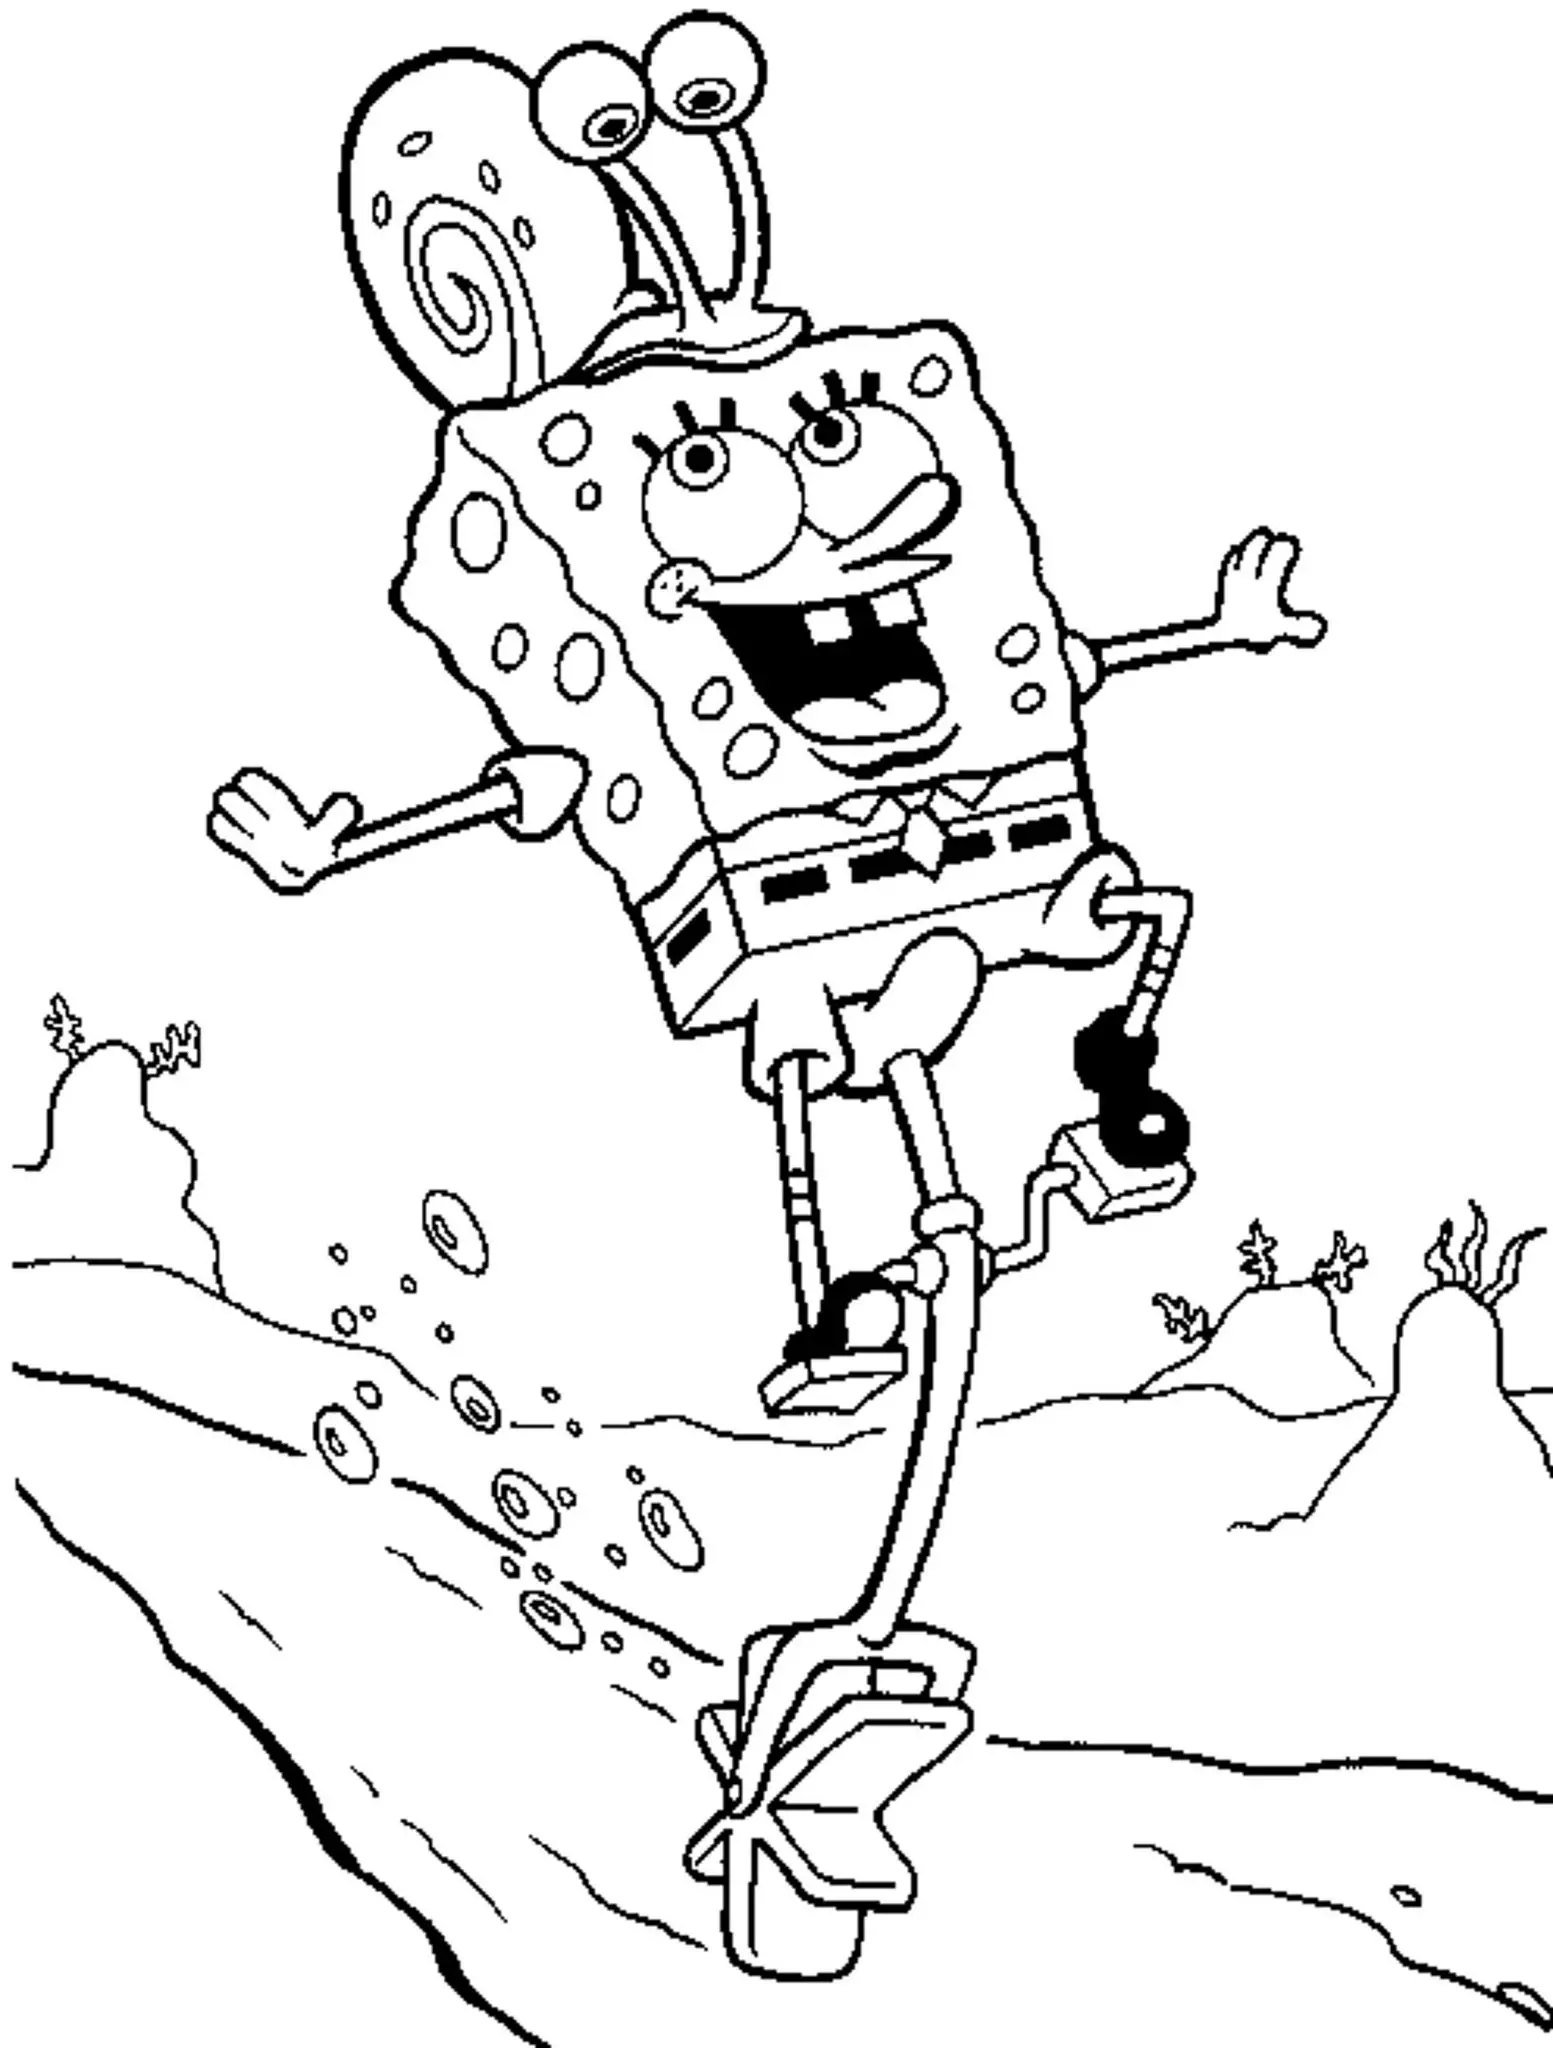 Funny Spongebob Coloring Pages Printables 92